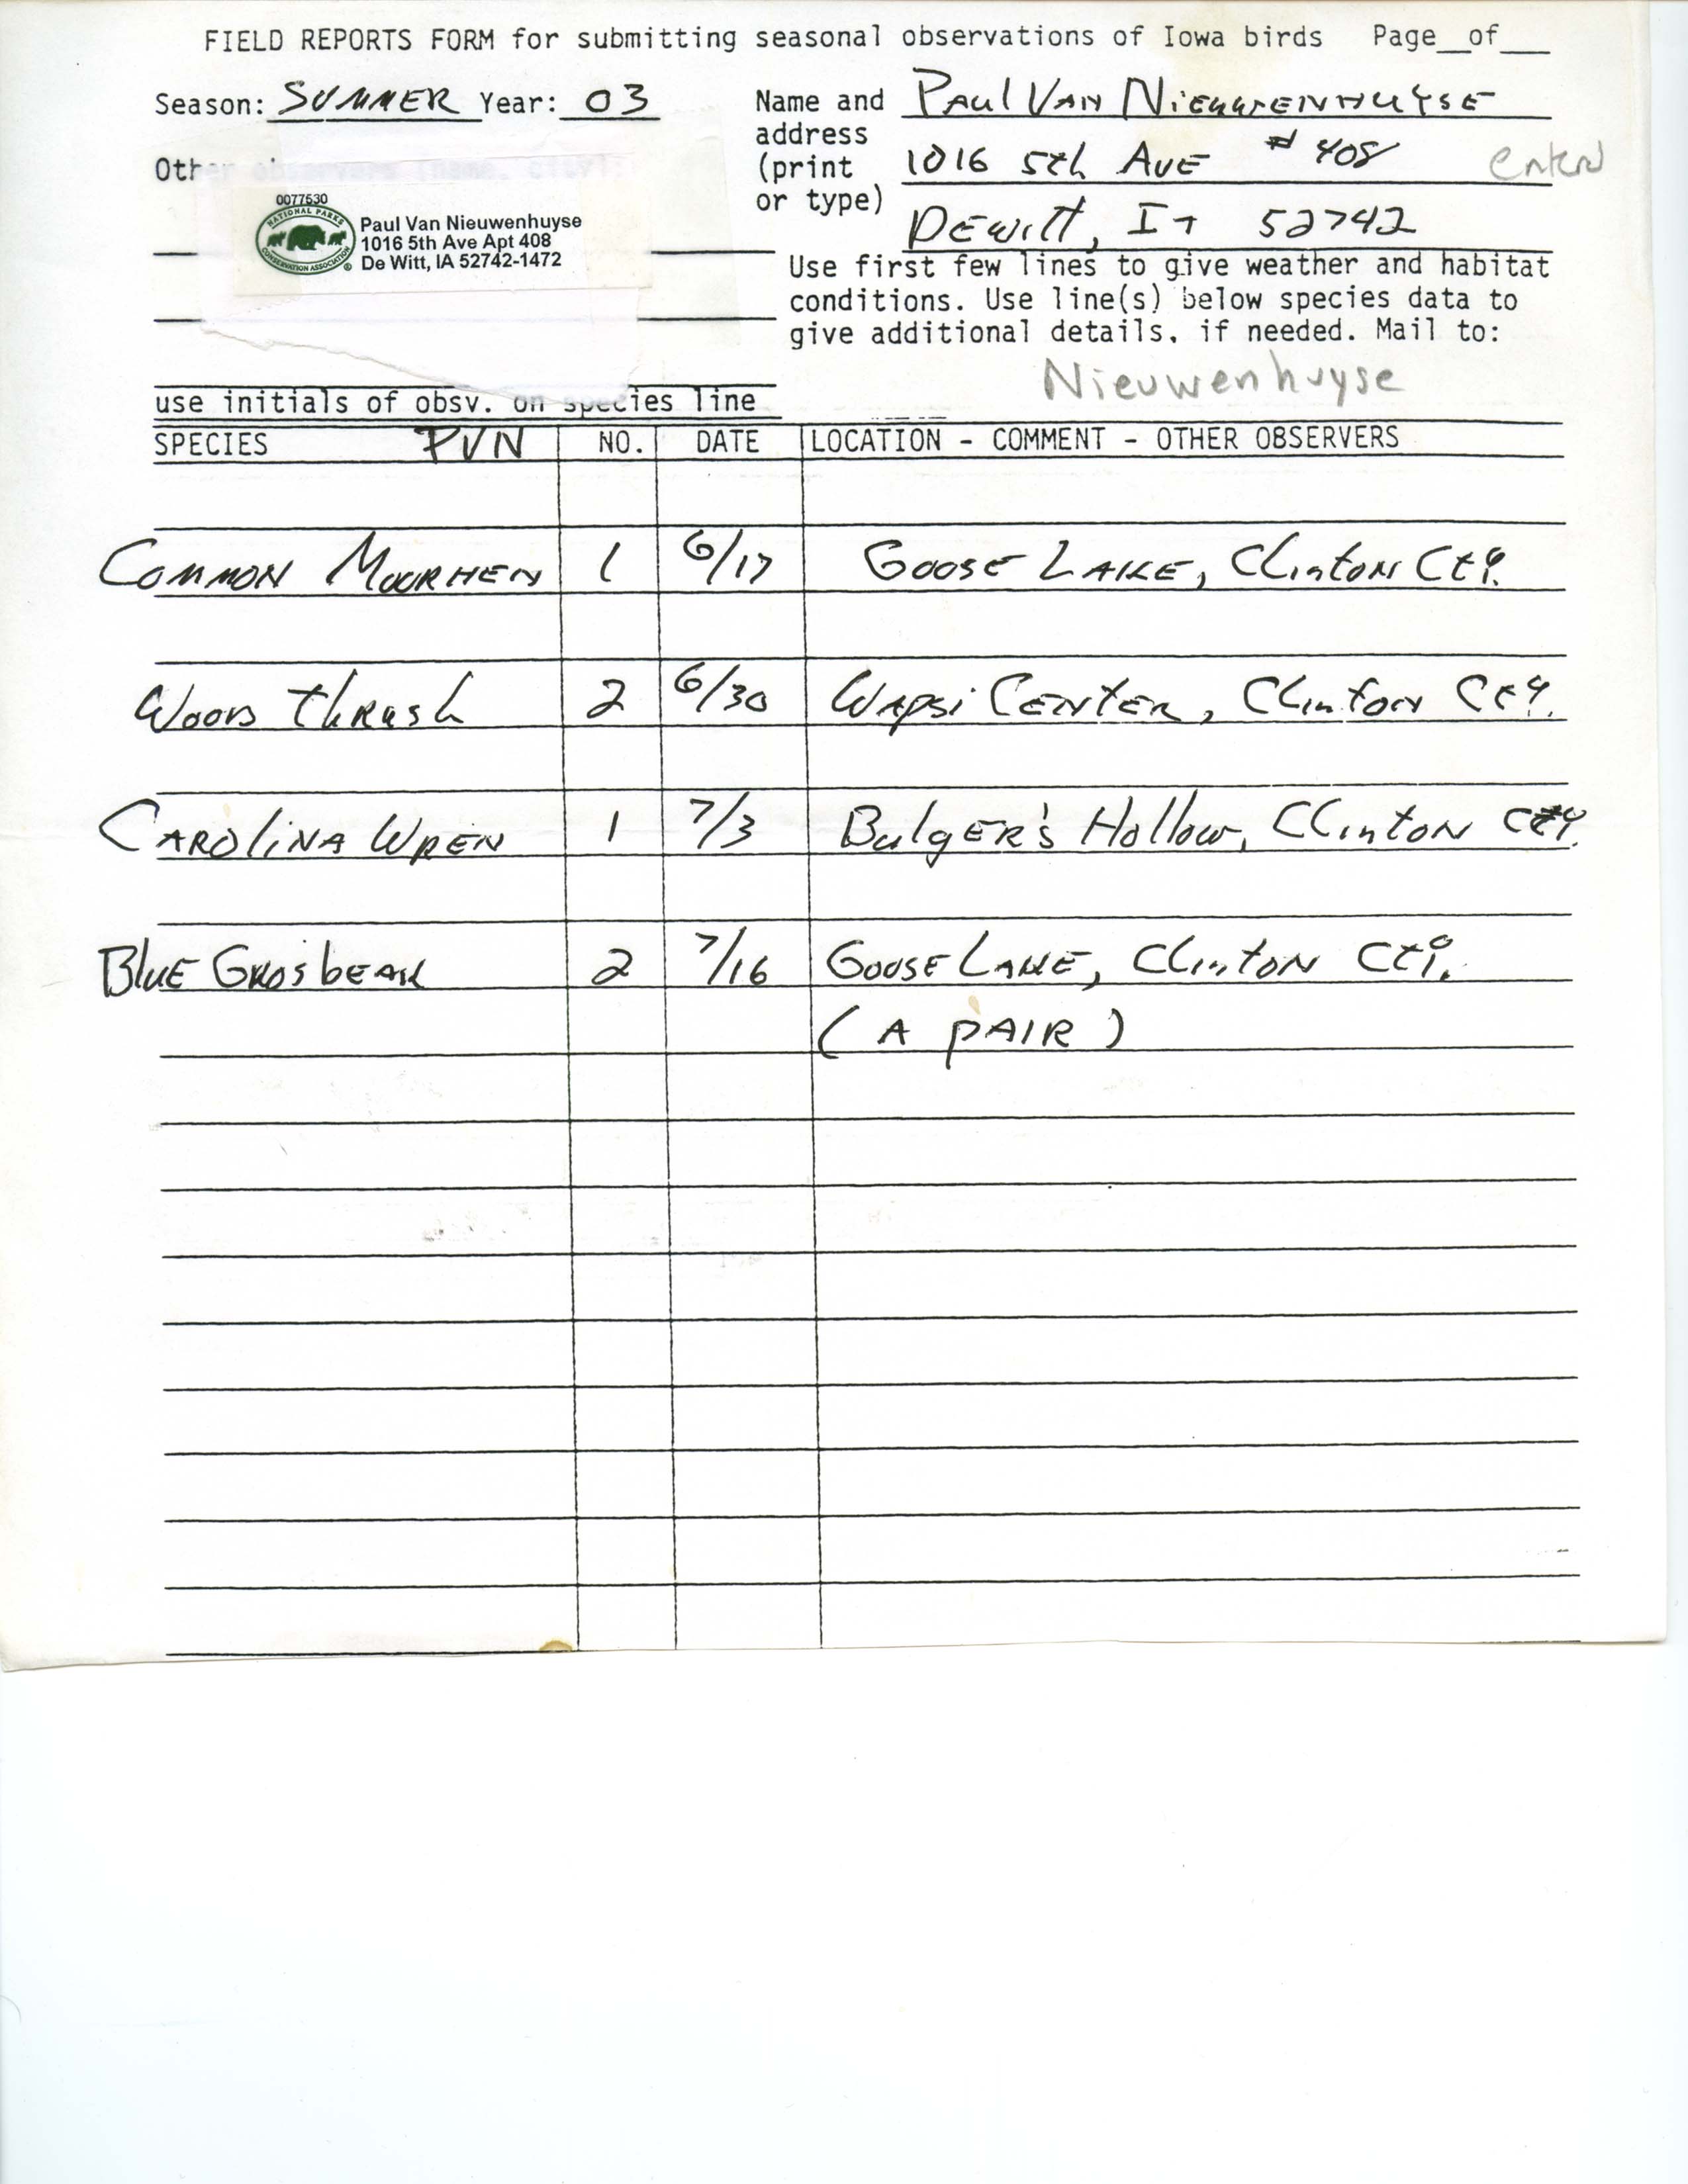 Field reports form for submitting seasonal observations of Iowa birds, Paul Van Nieuwenhuyse, summer 2003